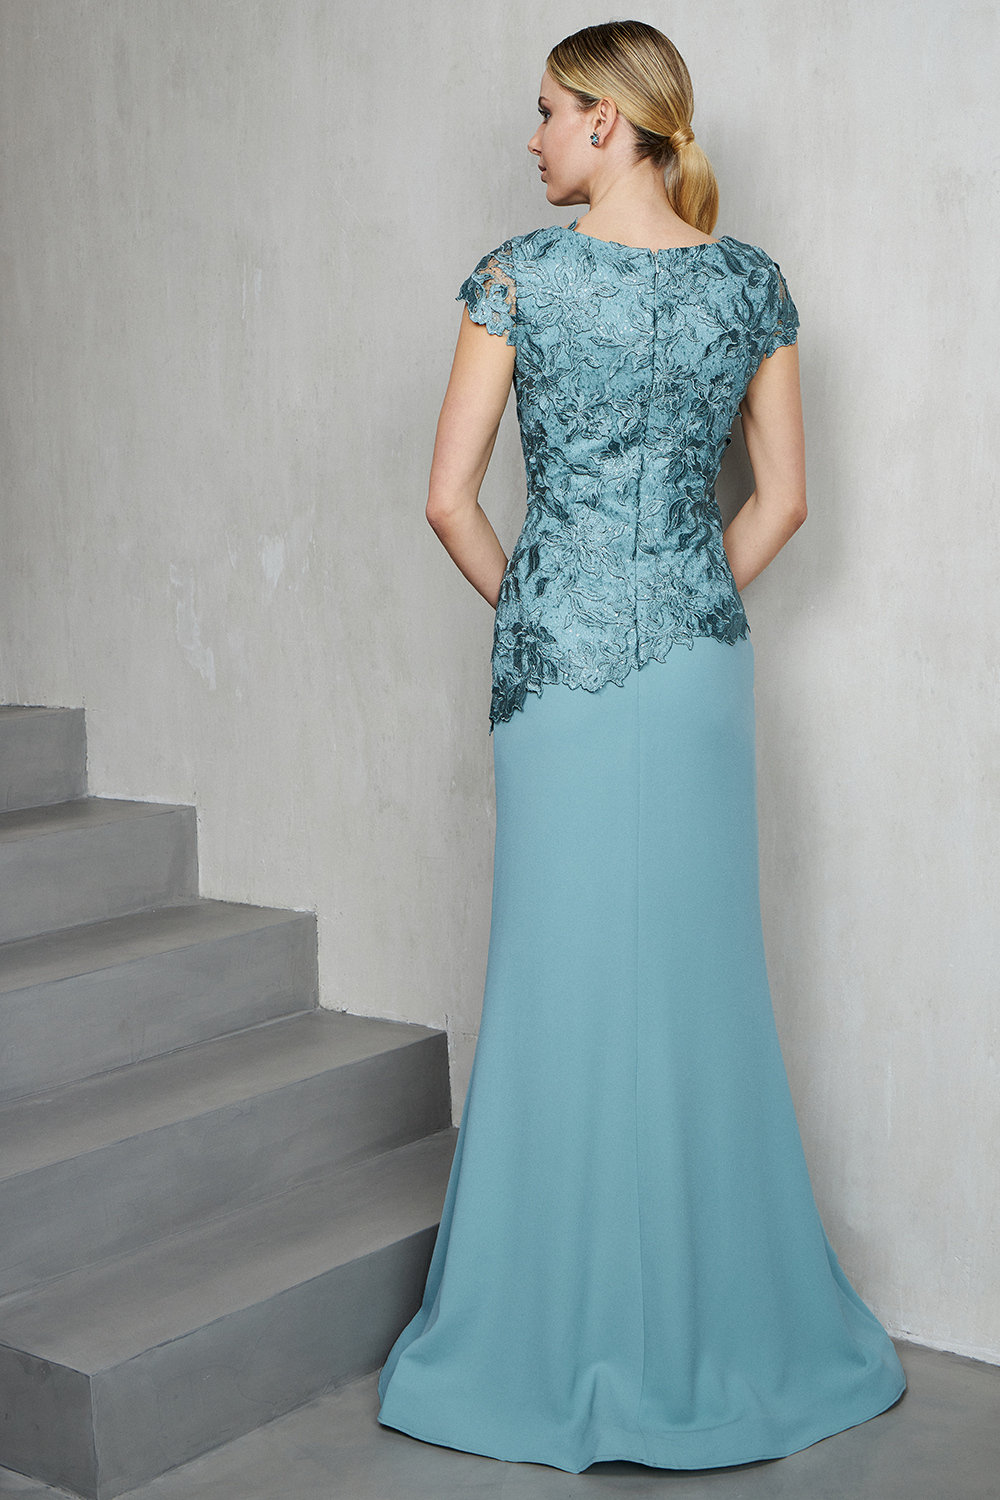 Classic Dresses / Long evening dress with lace top for the mother of the bride